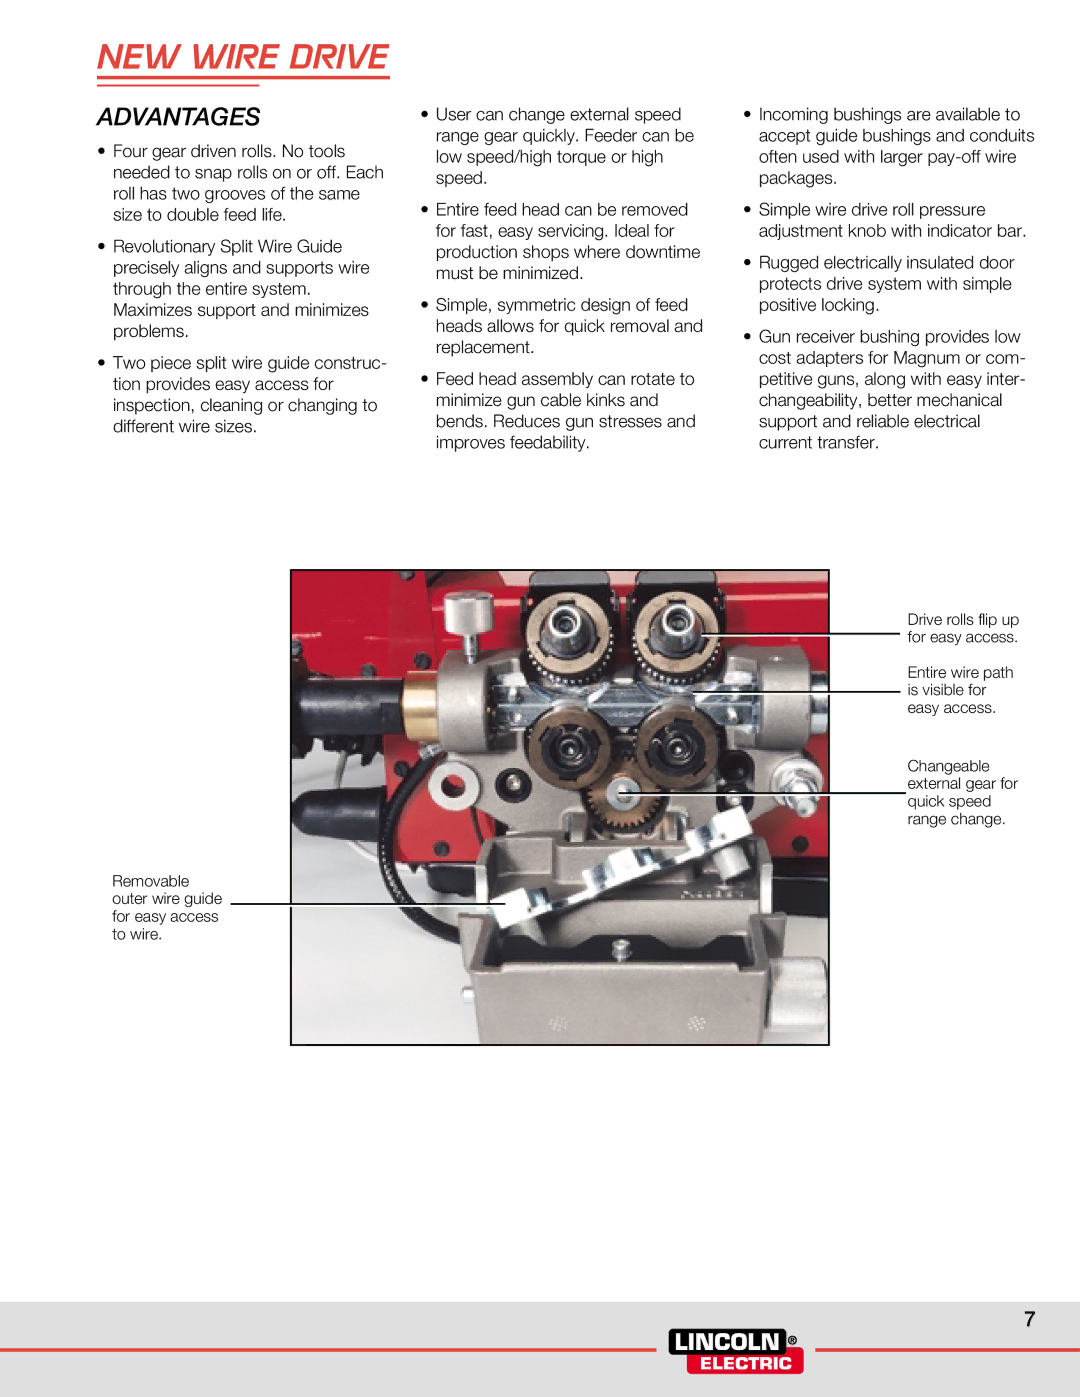 Lincoln Electric WELDING SYSTEMS manual NEW Wire Drive, Advantages 